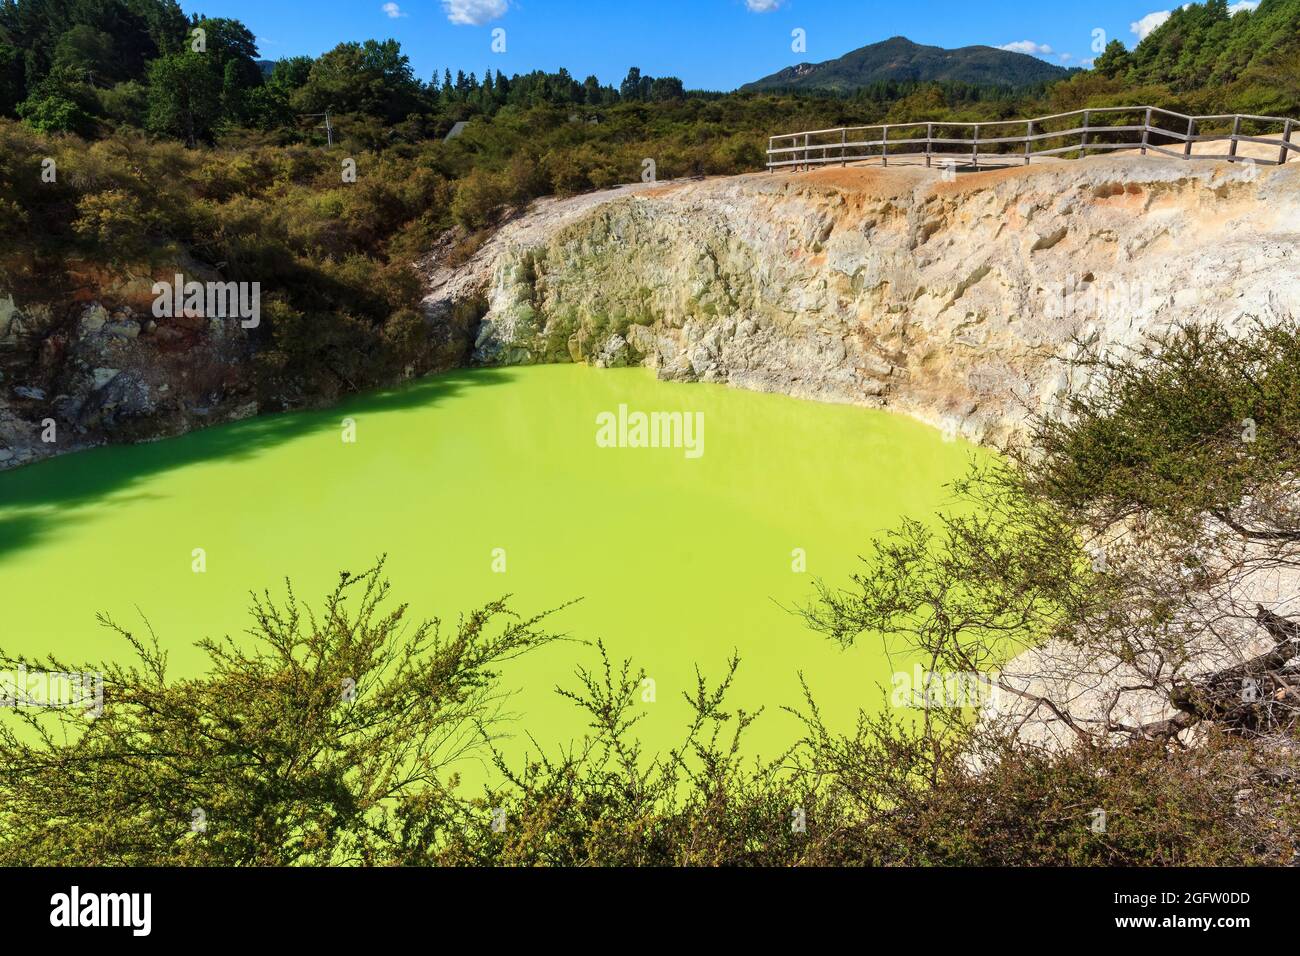 The 'Devil's Bath', a brightly colored pool in the Waiotapu geothermal area, New Zealand. The green color comes from sulfur deposits in the water Stock Photo